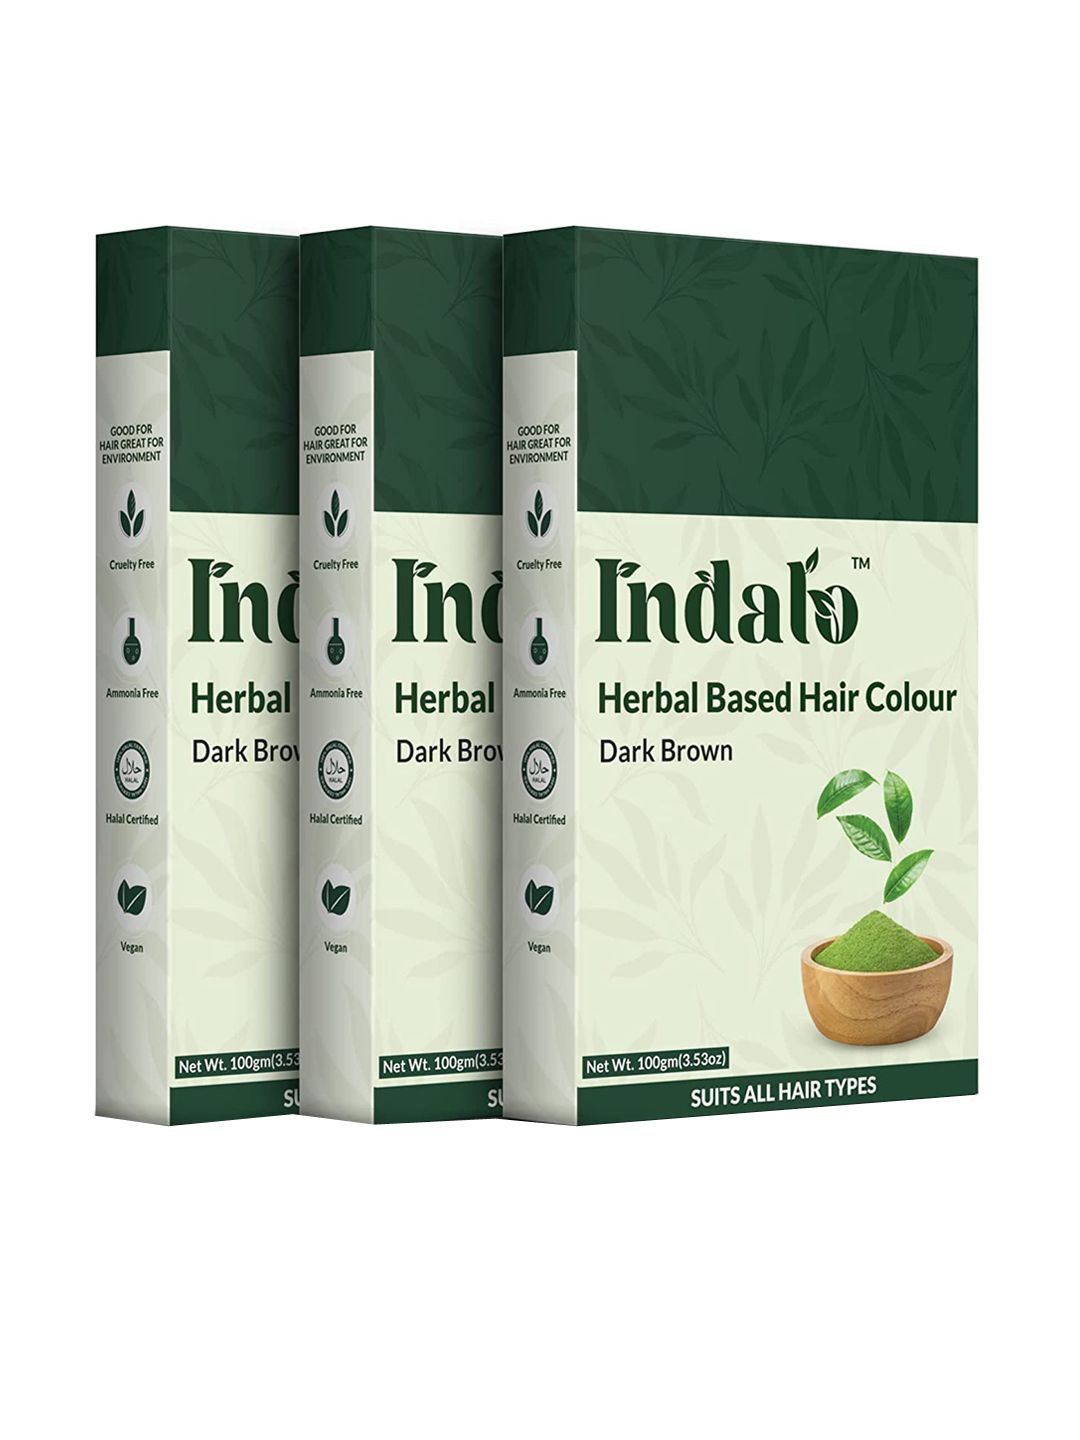 INDALO Set of 3 Herbal Based Hair Colour with Amla and Brahmi 100g Each - Dark Brown Price in India